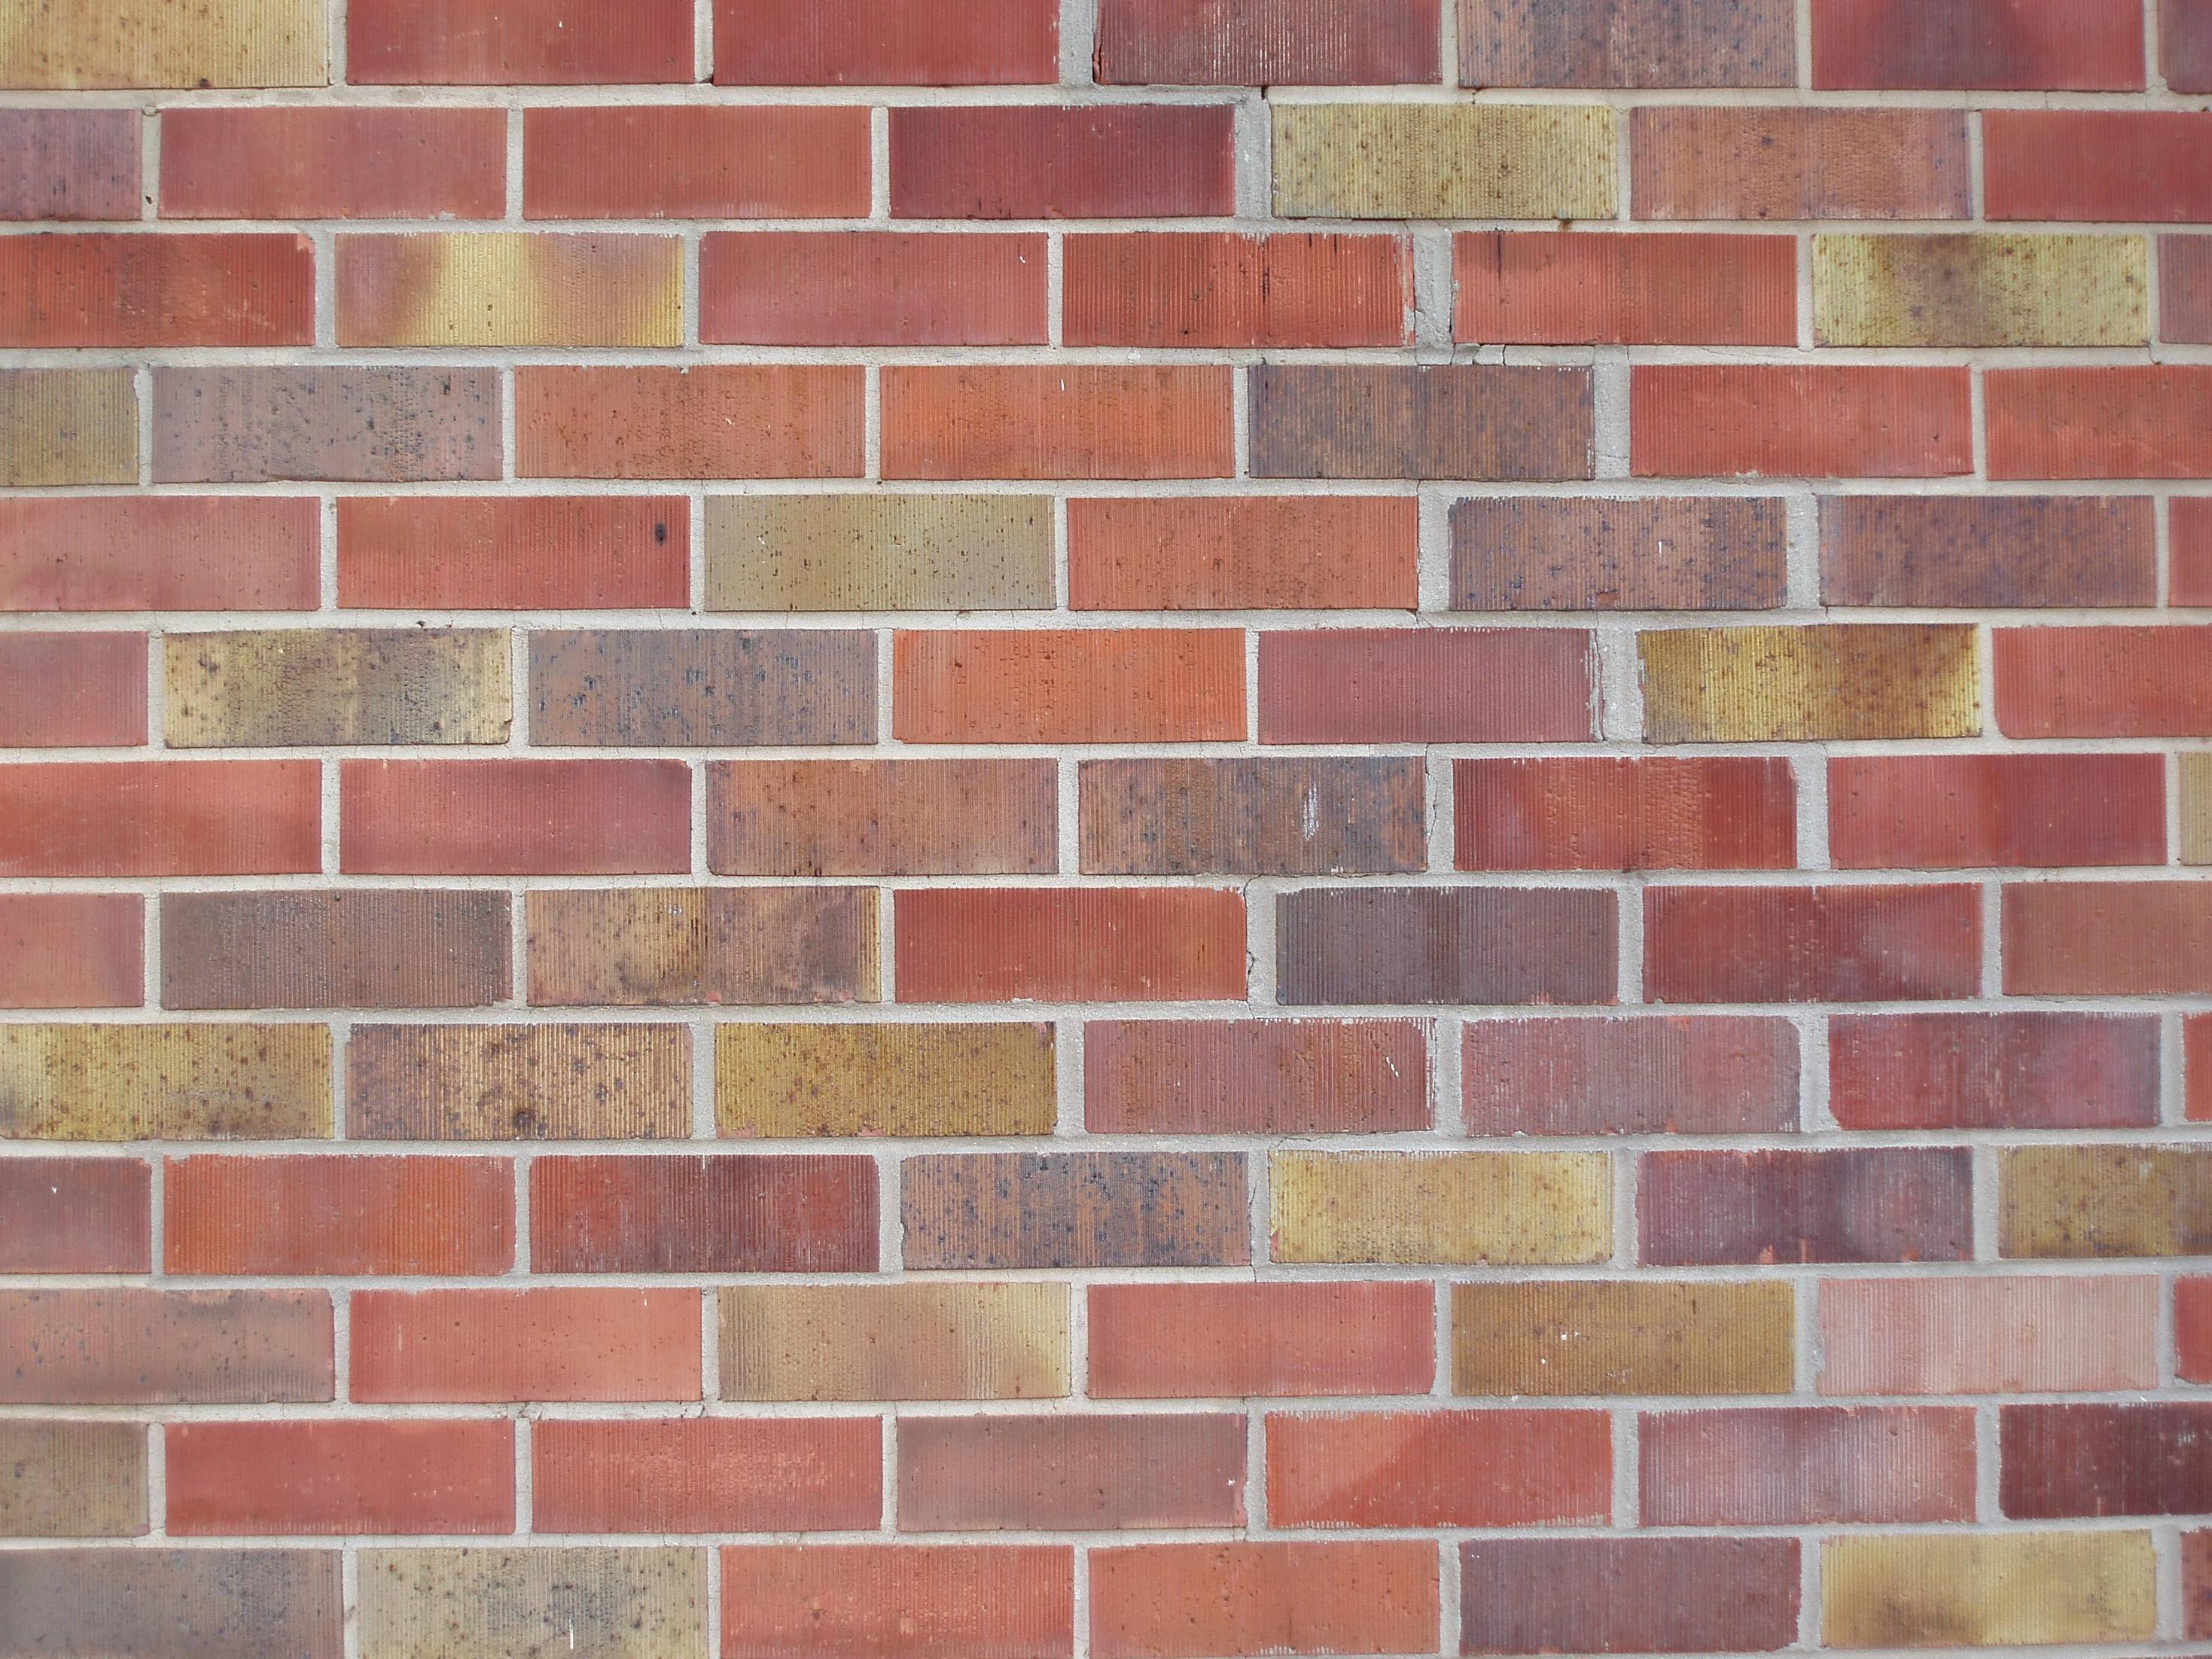 horizontal brick wall. Free background and textures. Cr103